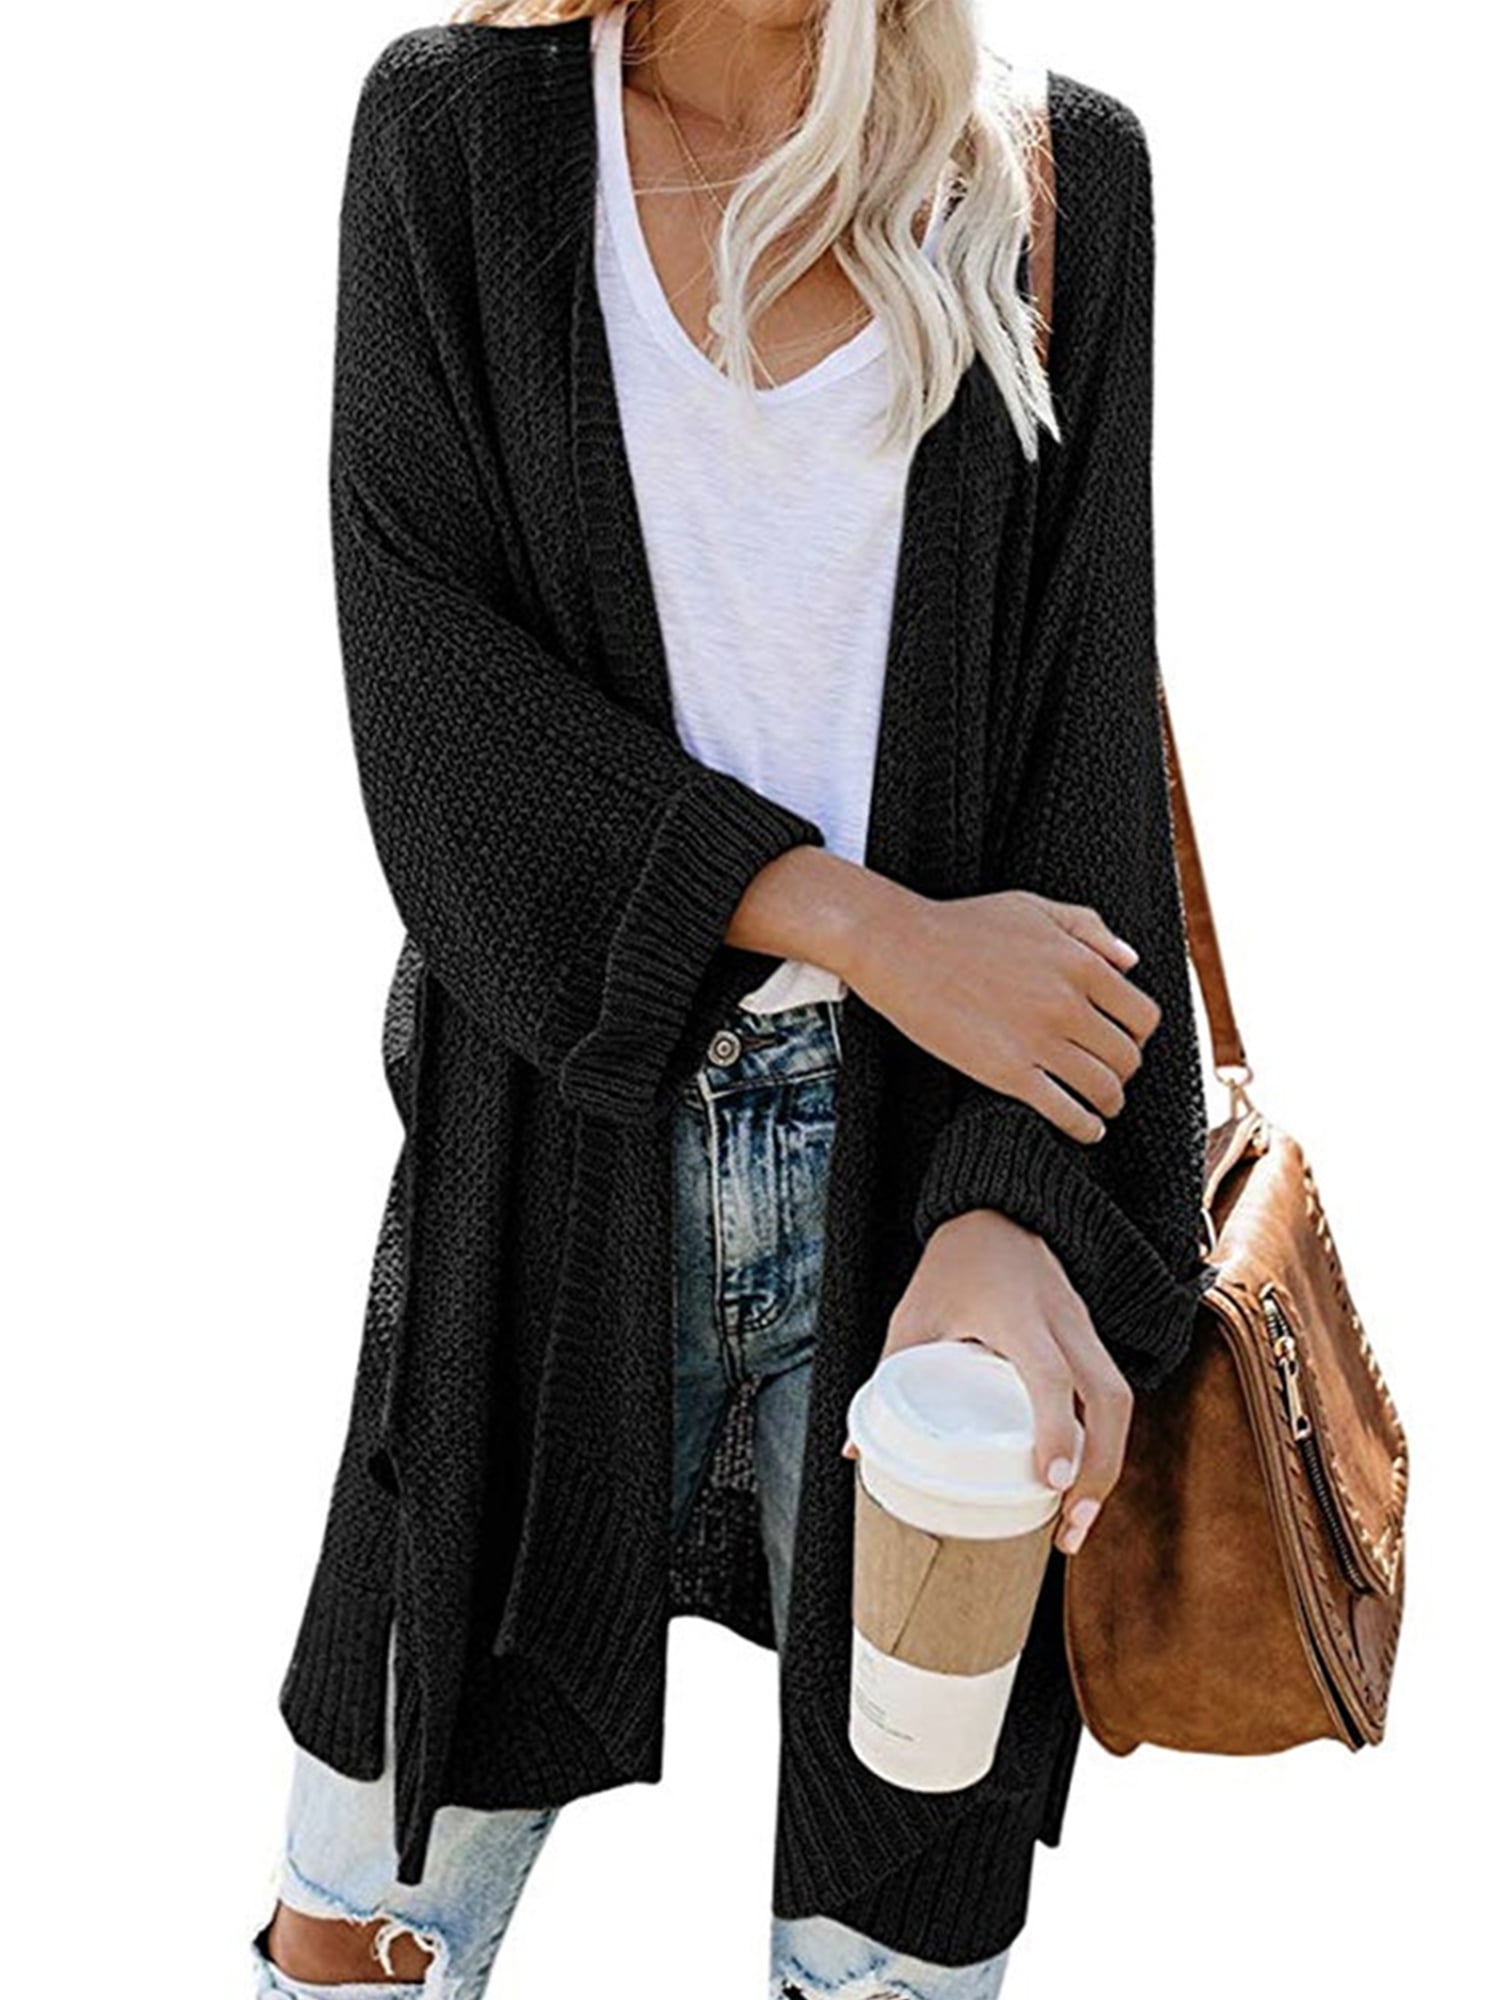 Women's Open Front Cardigans Long Sleeve Loose Casual Sweaters Jackets Fashion Chunky Warm Coats 